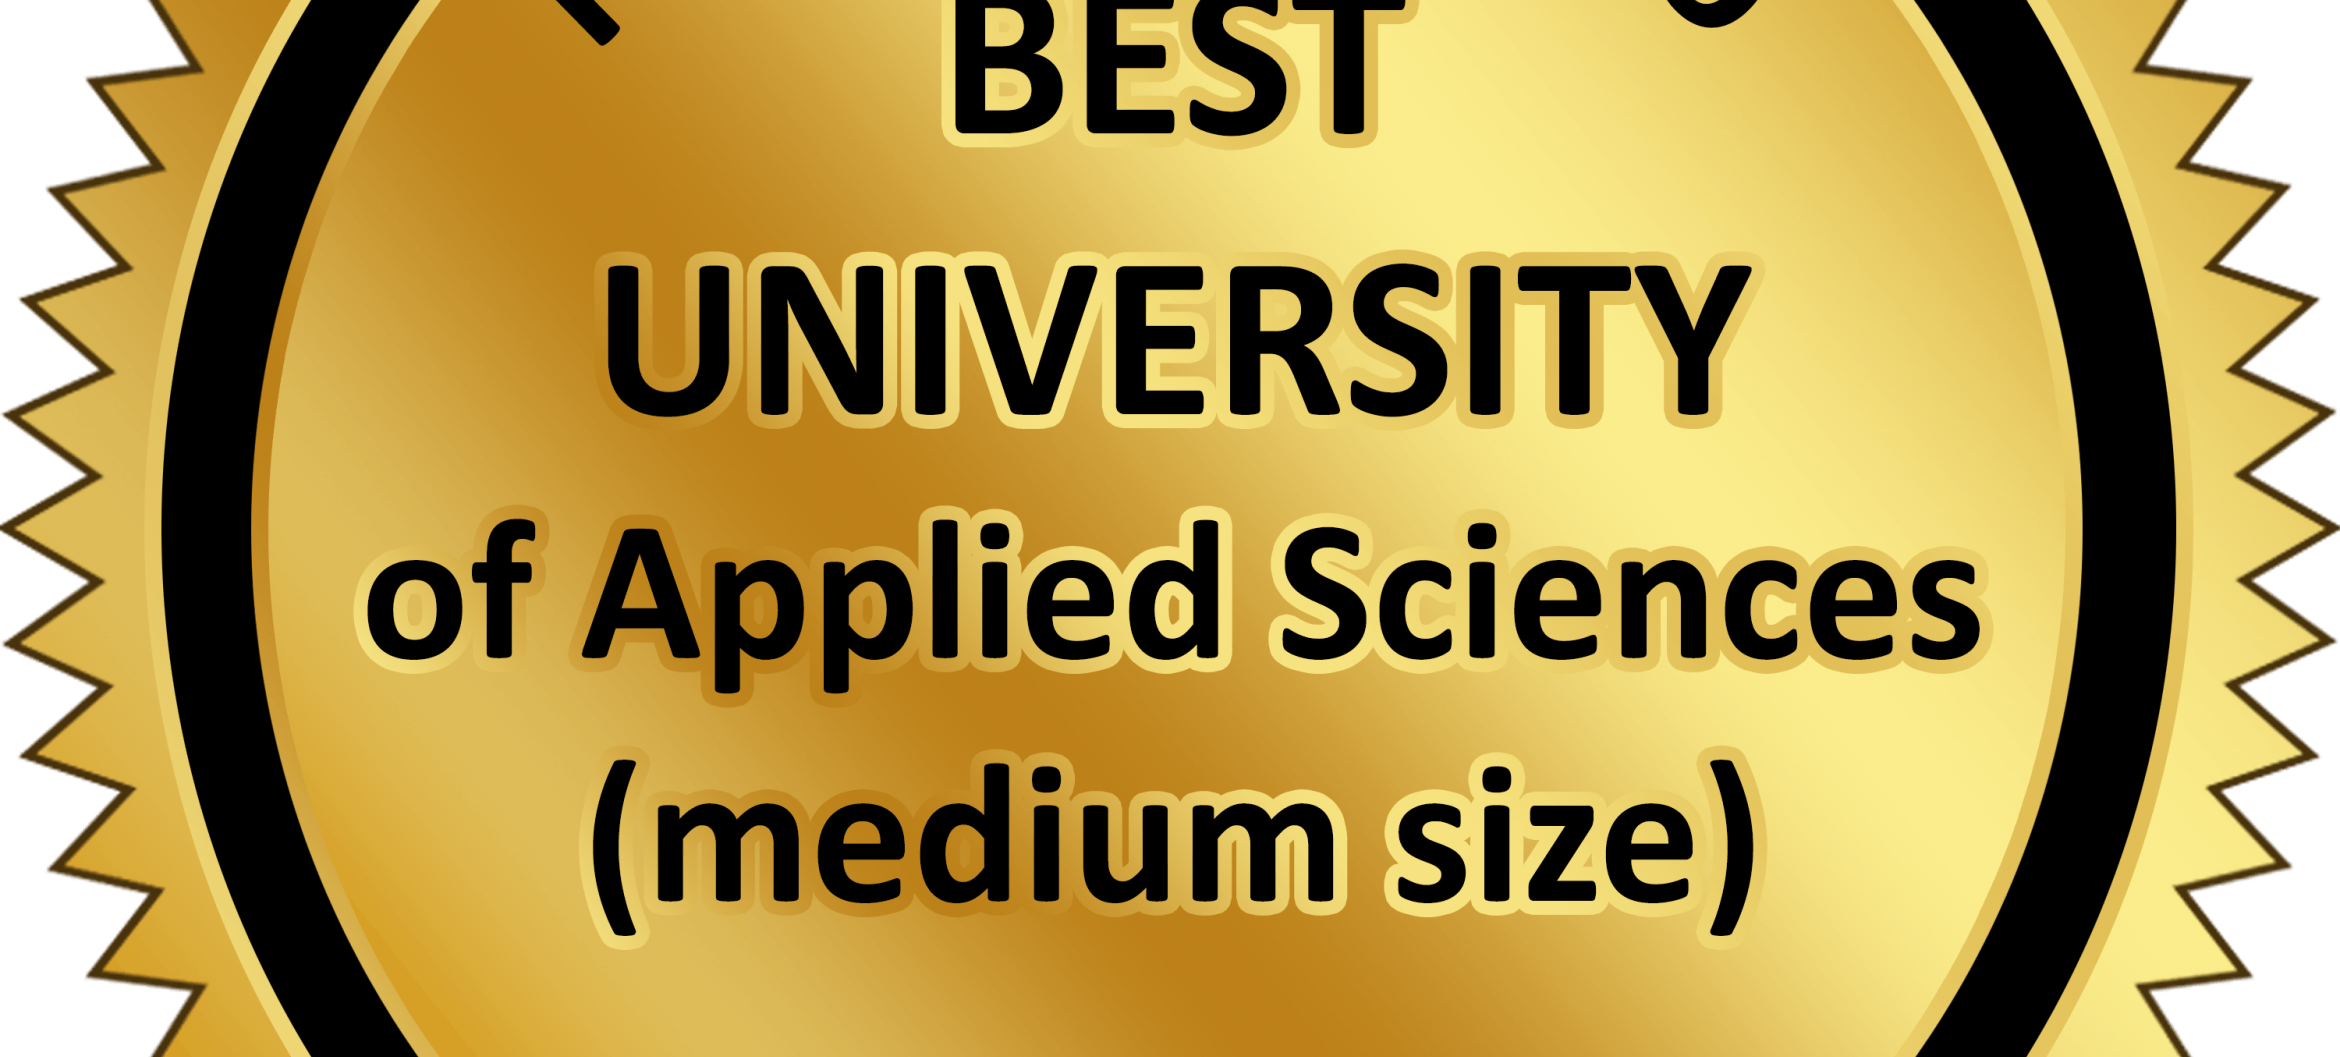 ArtEZ Best University  according to 2018 Master&#039;s Guide